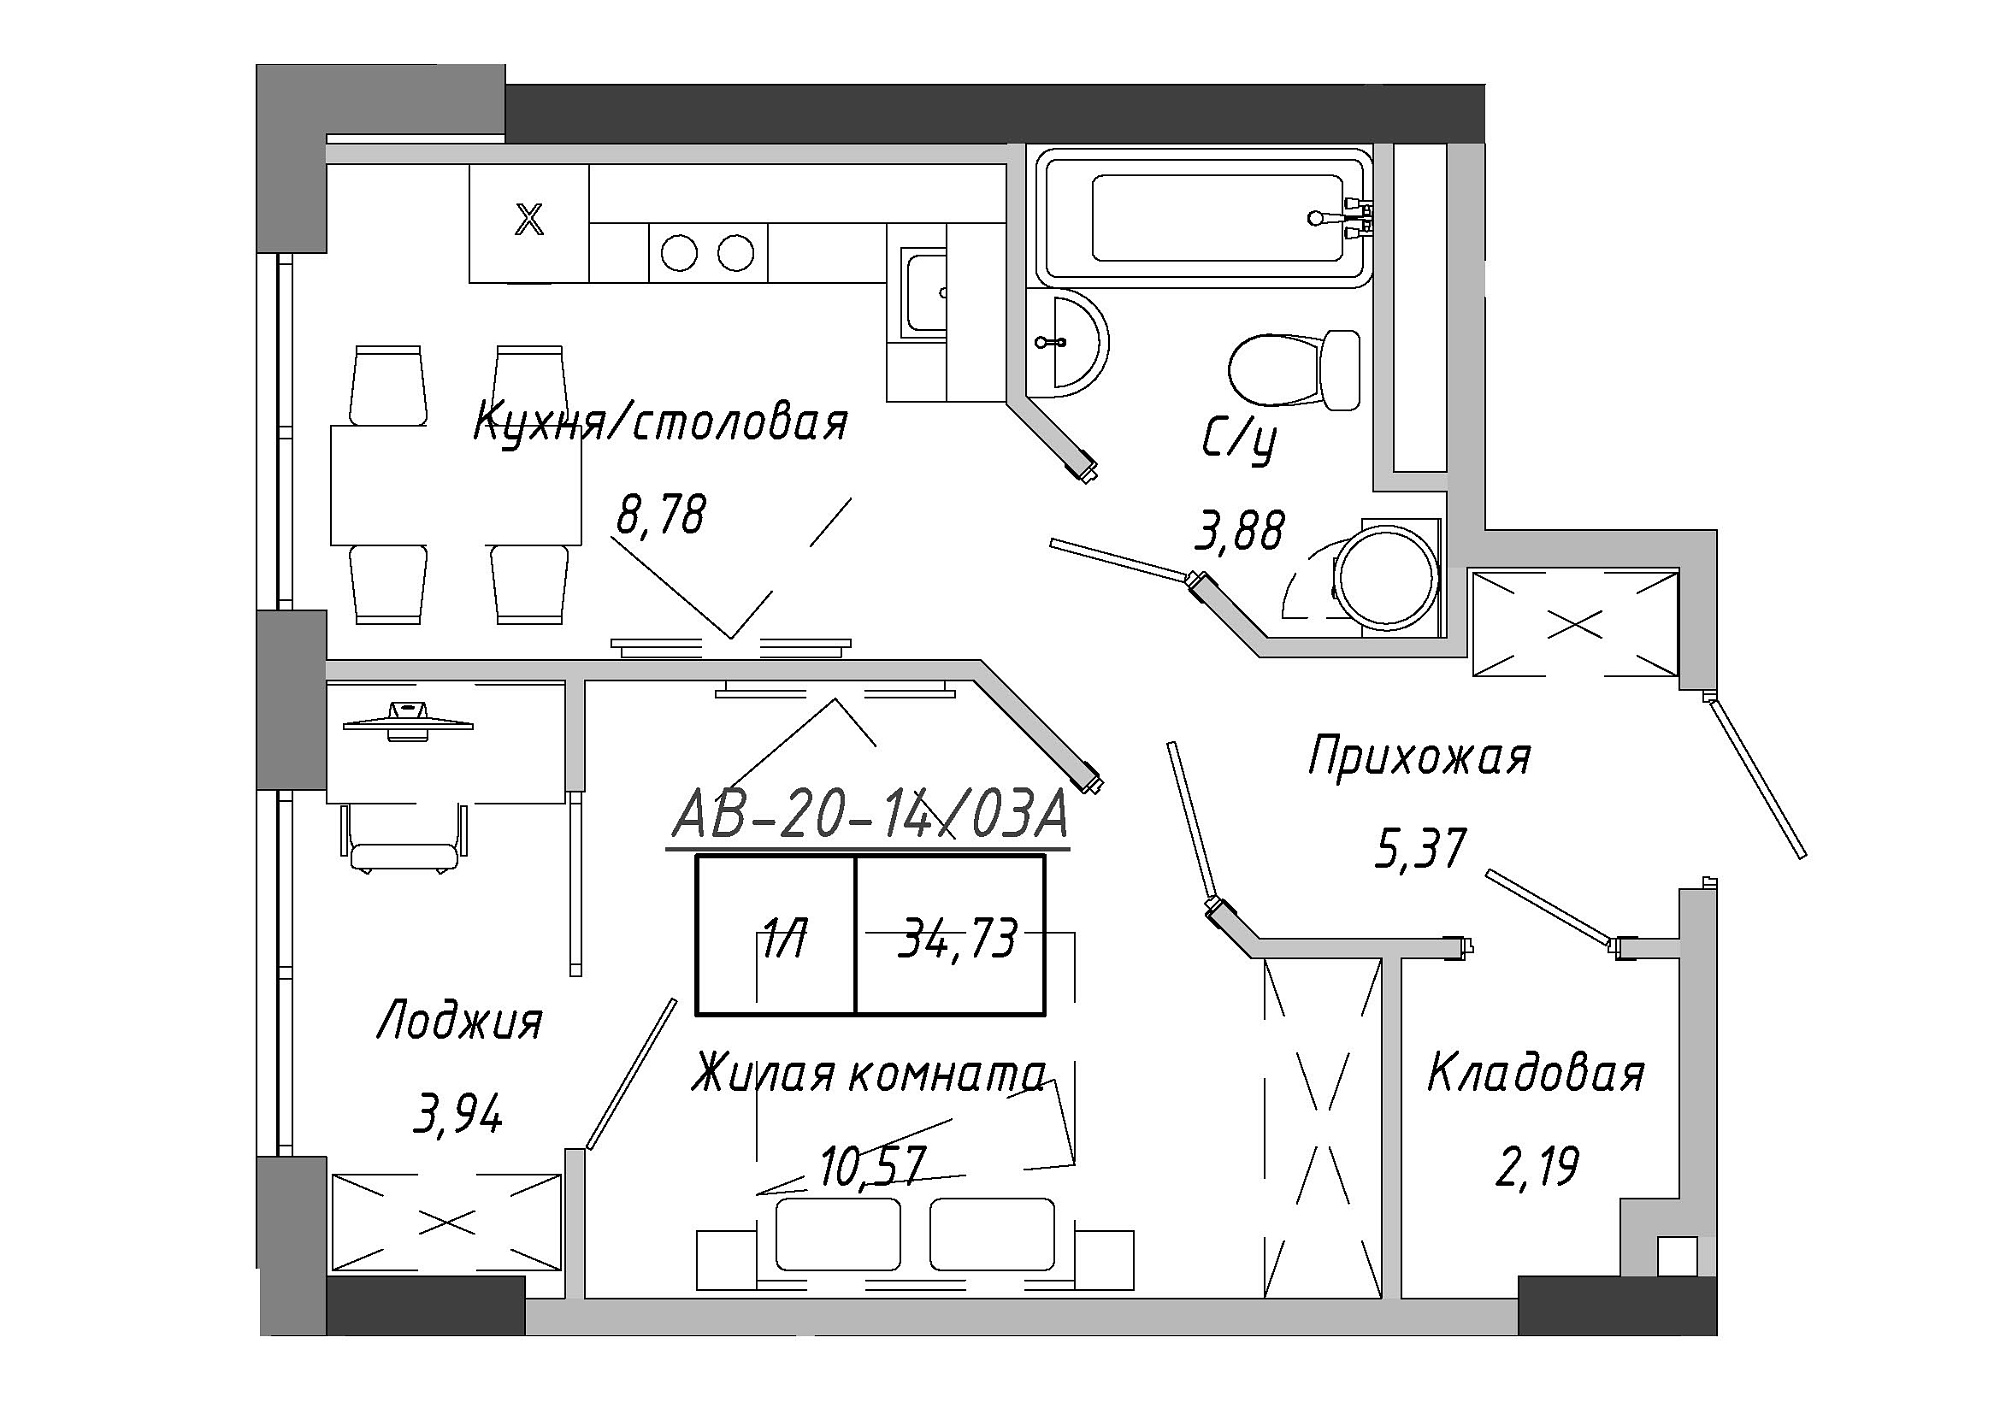 Planning 1-rm flats area 34.73m2, AB-20-14/0103a.